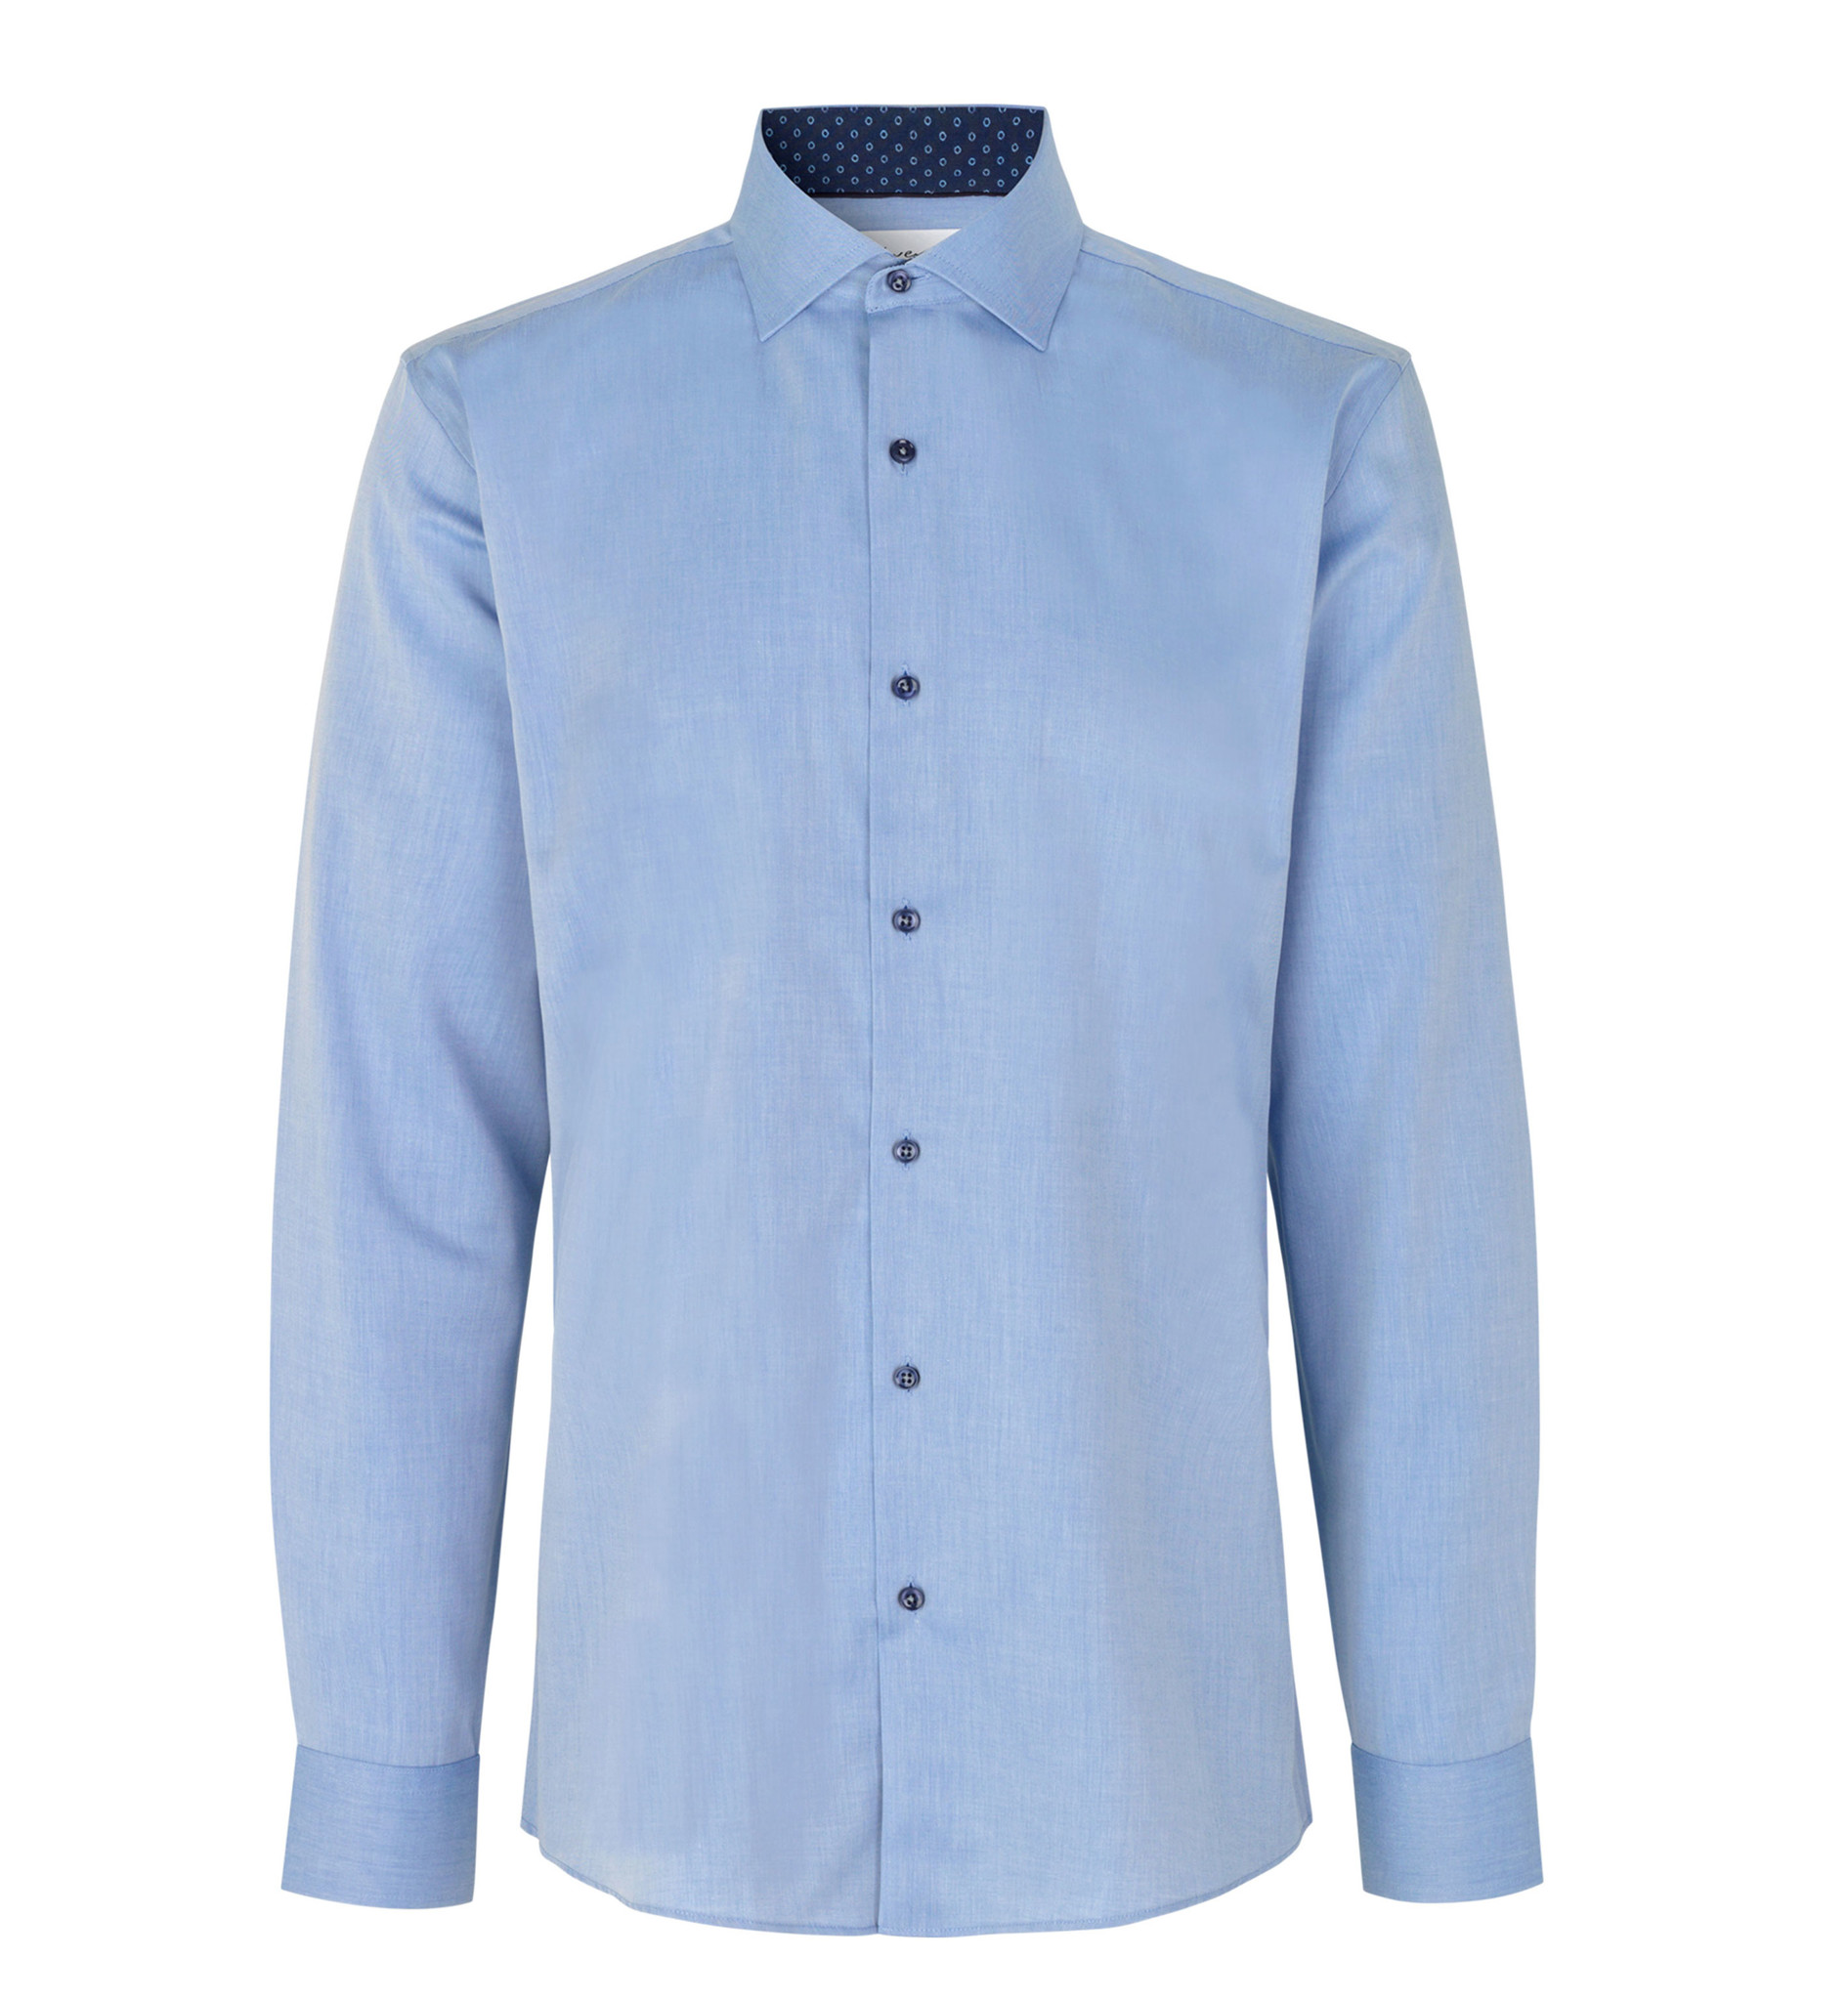 Picture of Fine twill contrast men's shirt